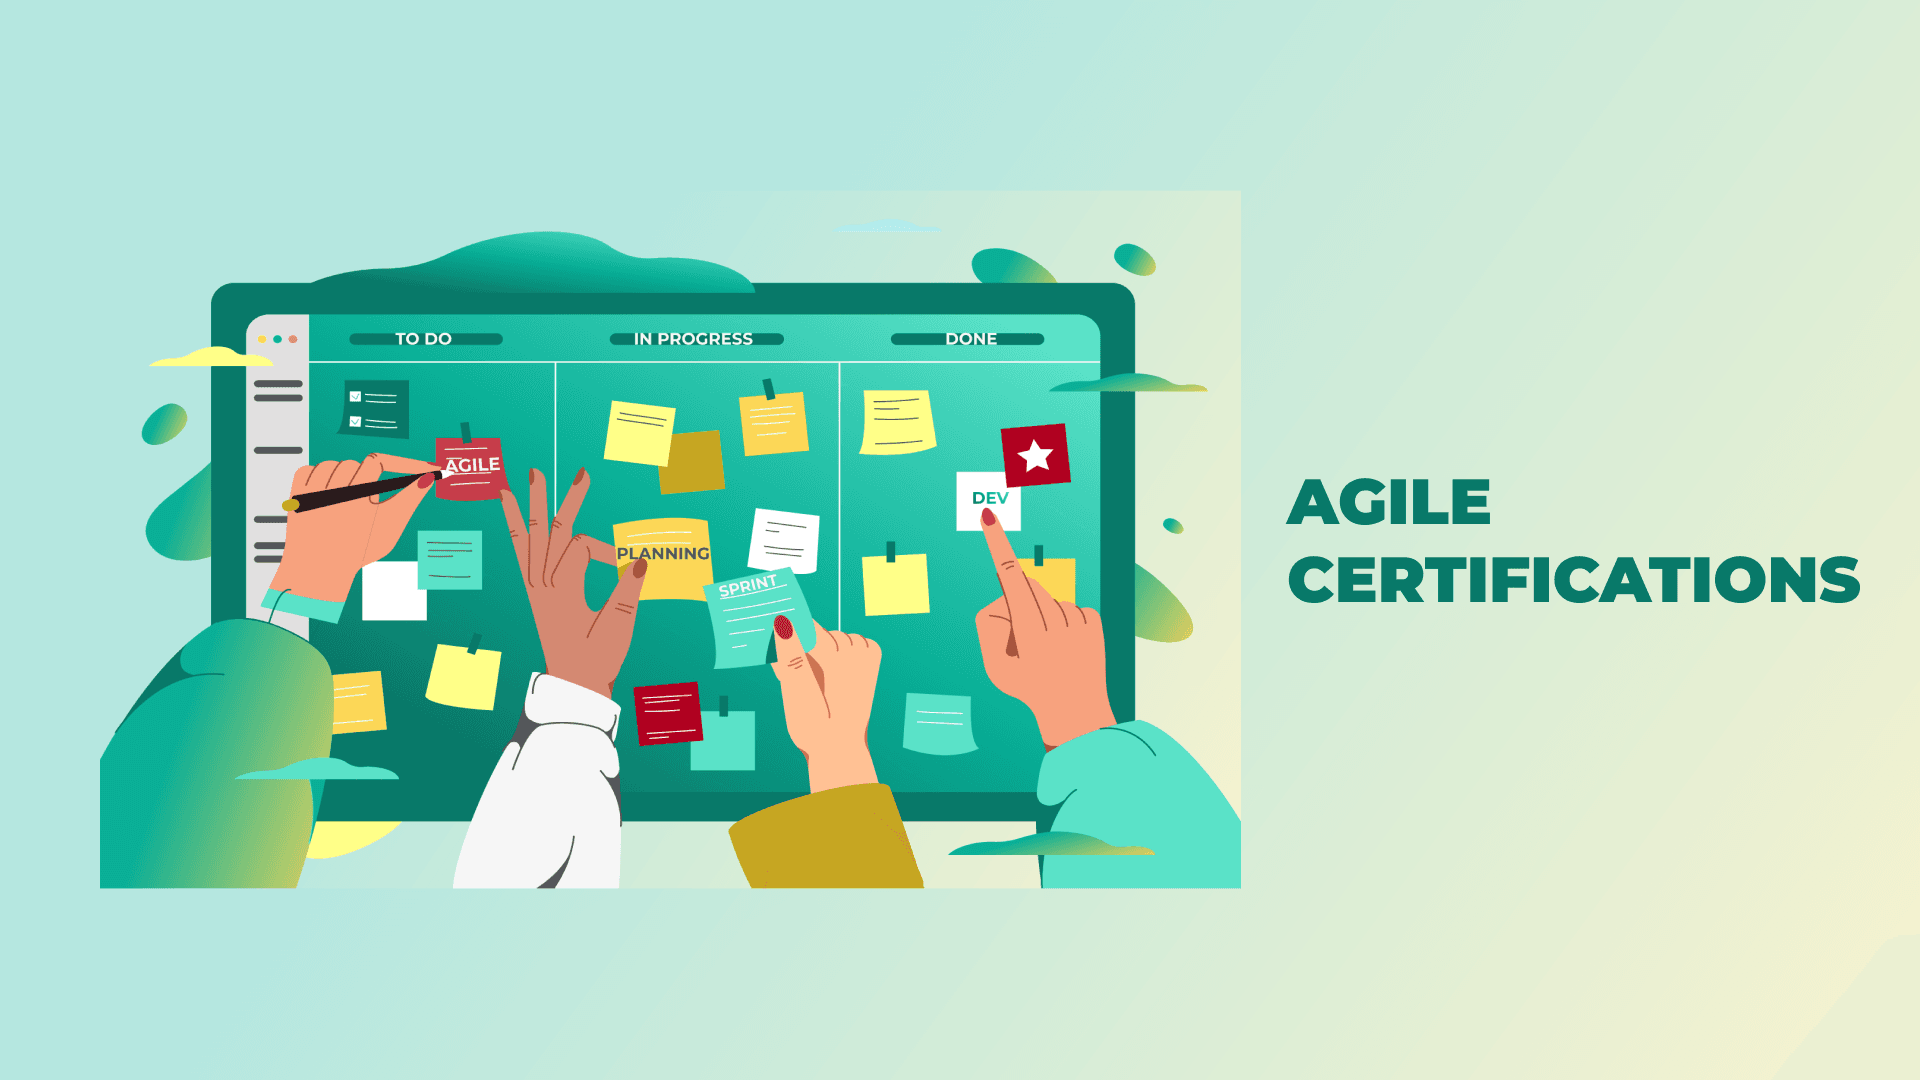 An infographic image of an agile board with agile certifications written on the right